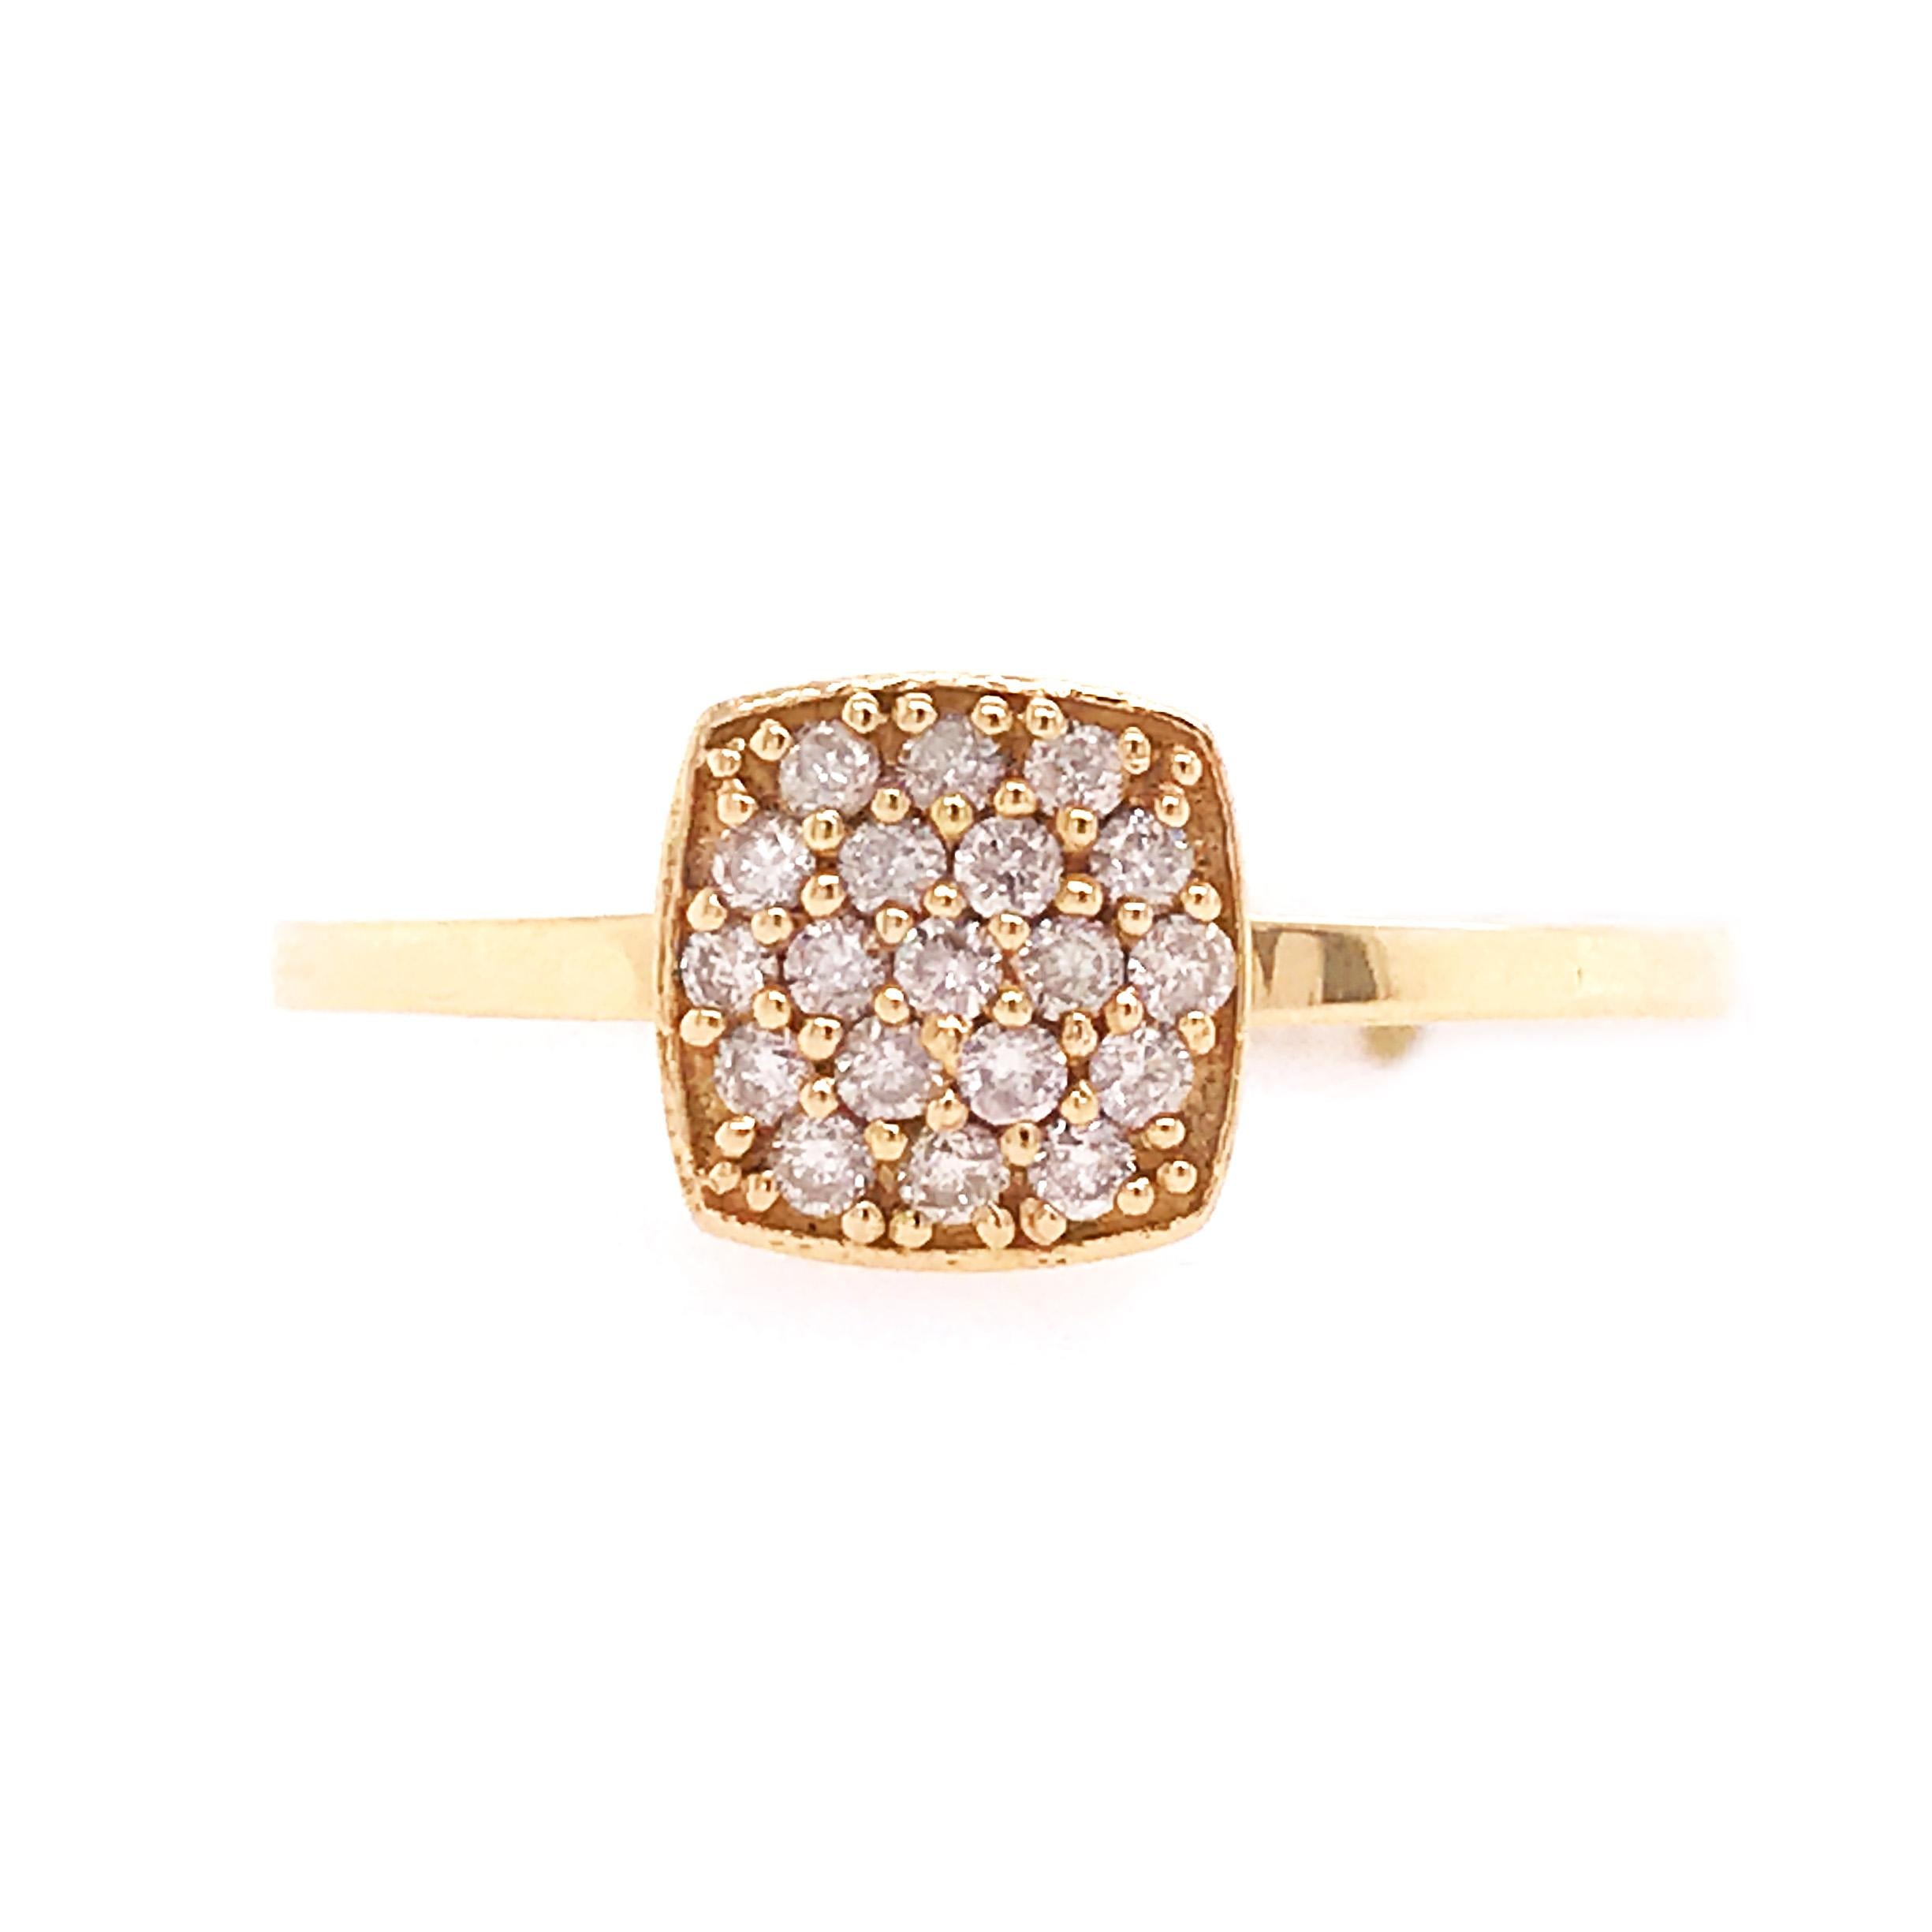 Contemporary Diamond Pave Ring with .20 Carat Diamond Weight in 14 Karat Yellow Gold, Cushion